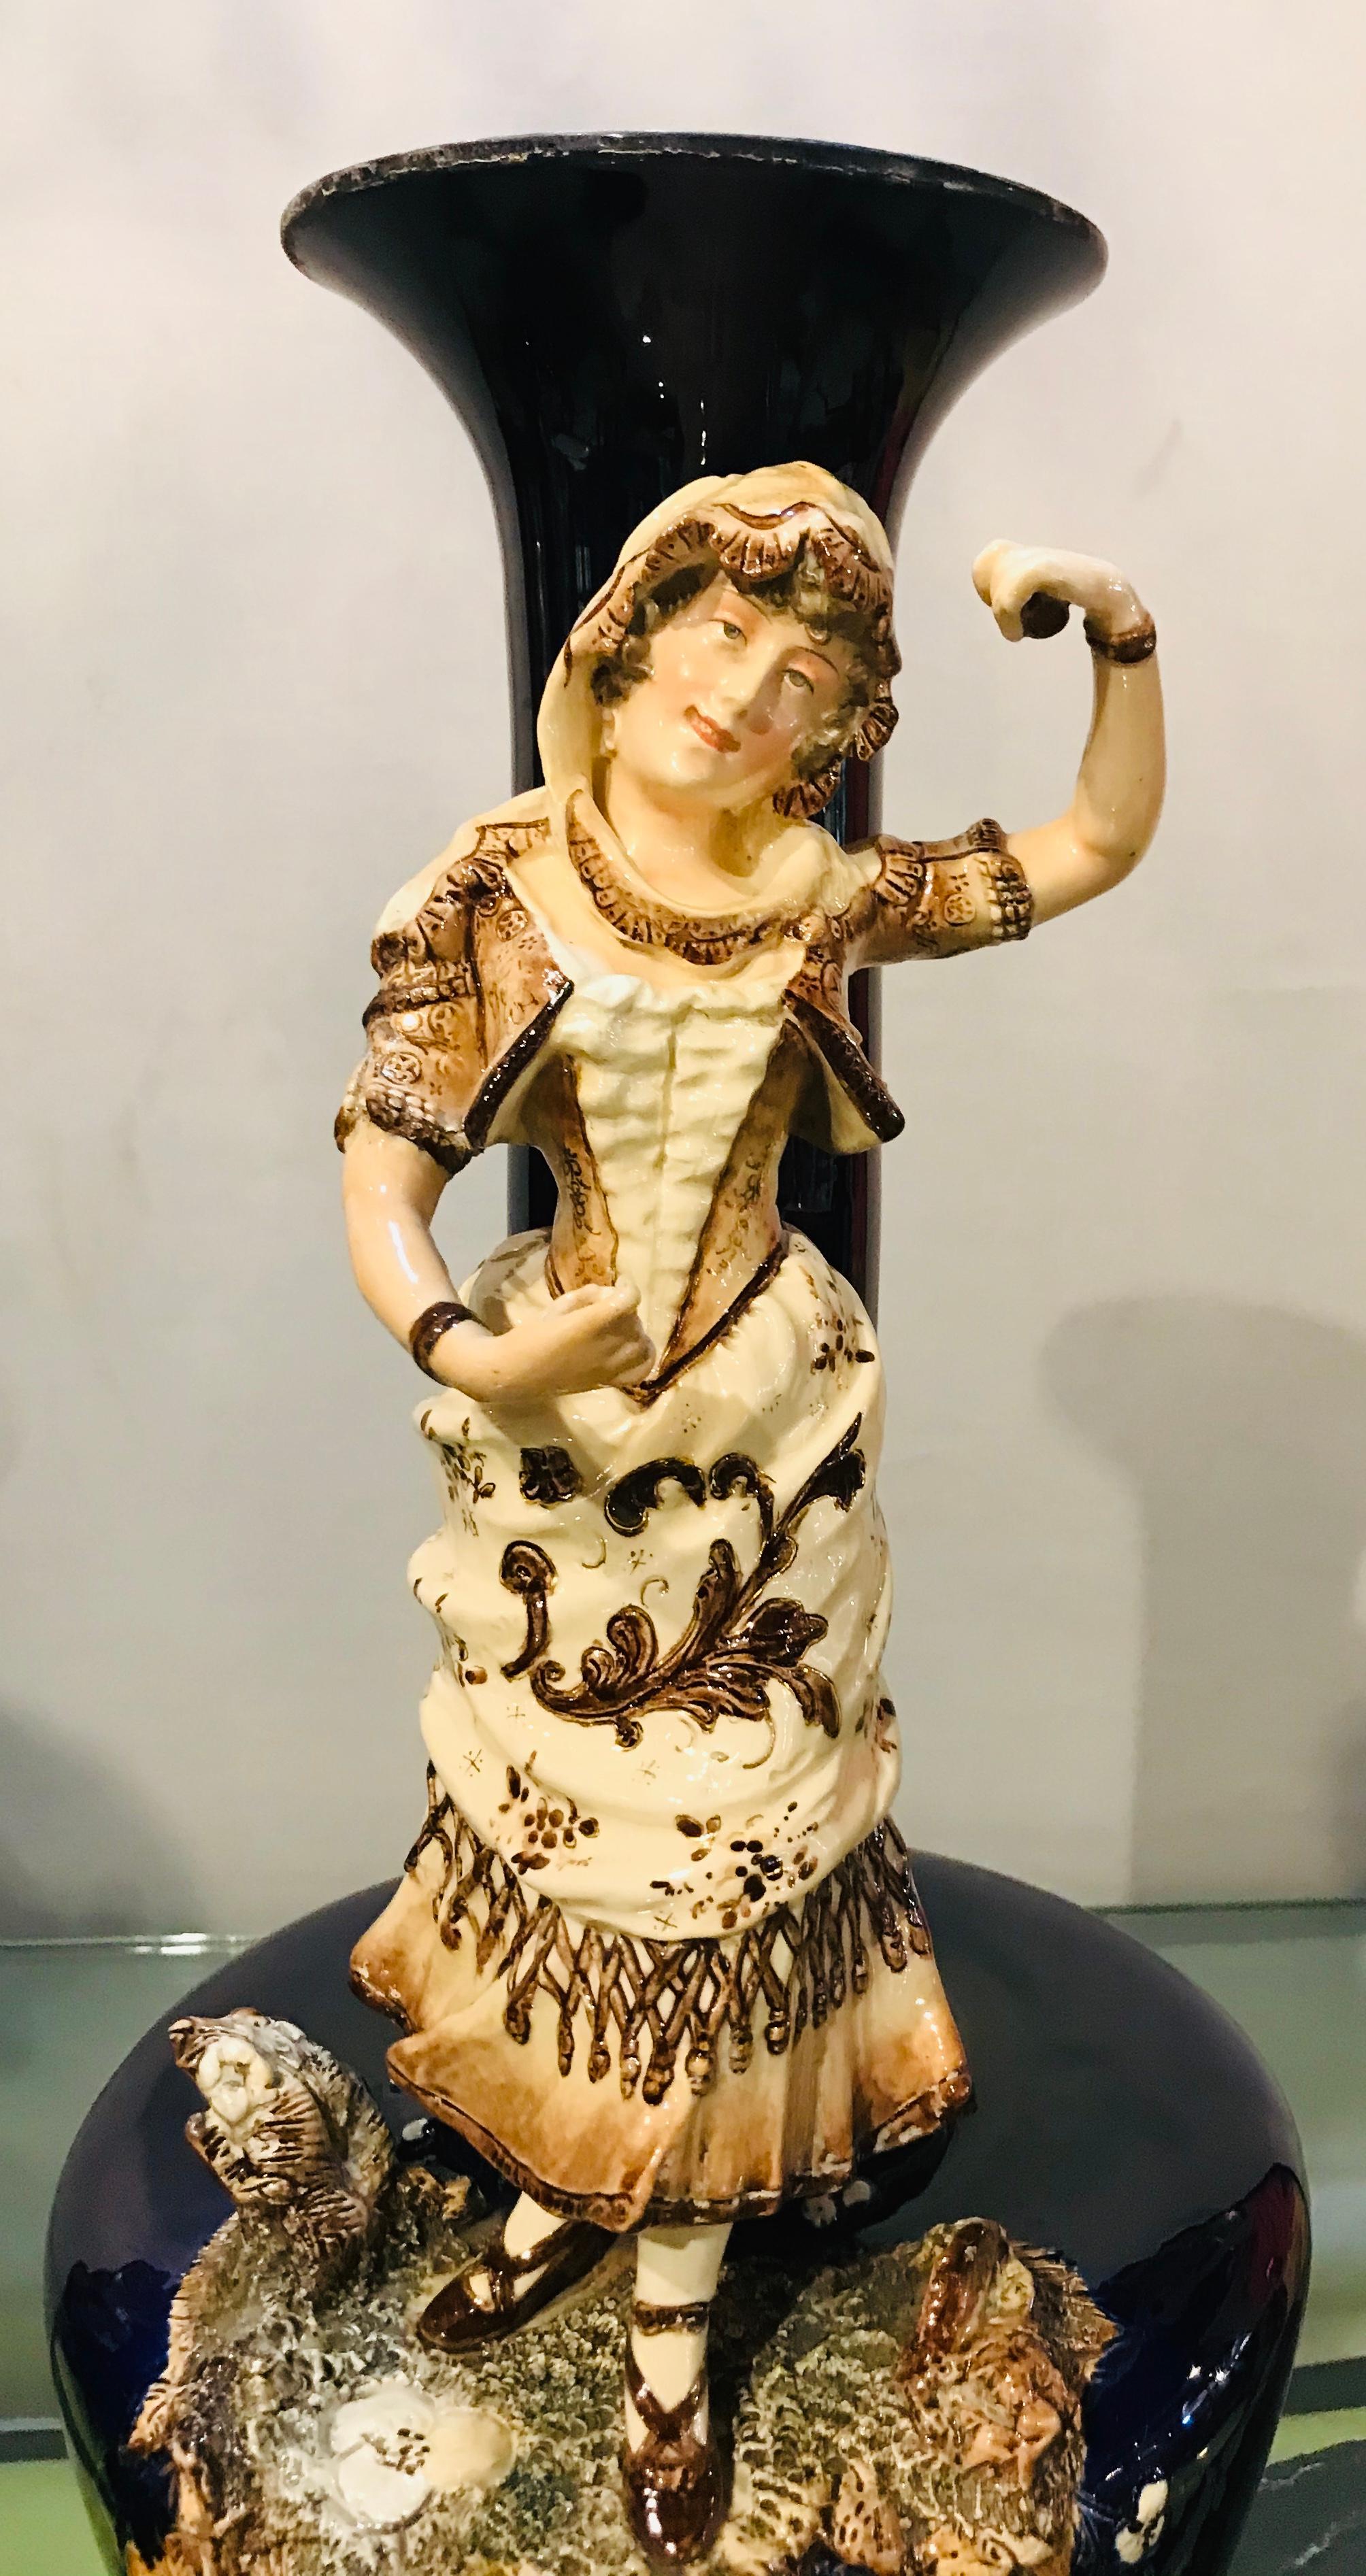 Two large porcelain French 19th-20th century figurative vases or male & female. Dated 1878 and signed on reverse. A finely cast musician and his dancing ballerina mounted on large cobalt blu vases each on a bronze stand.